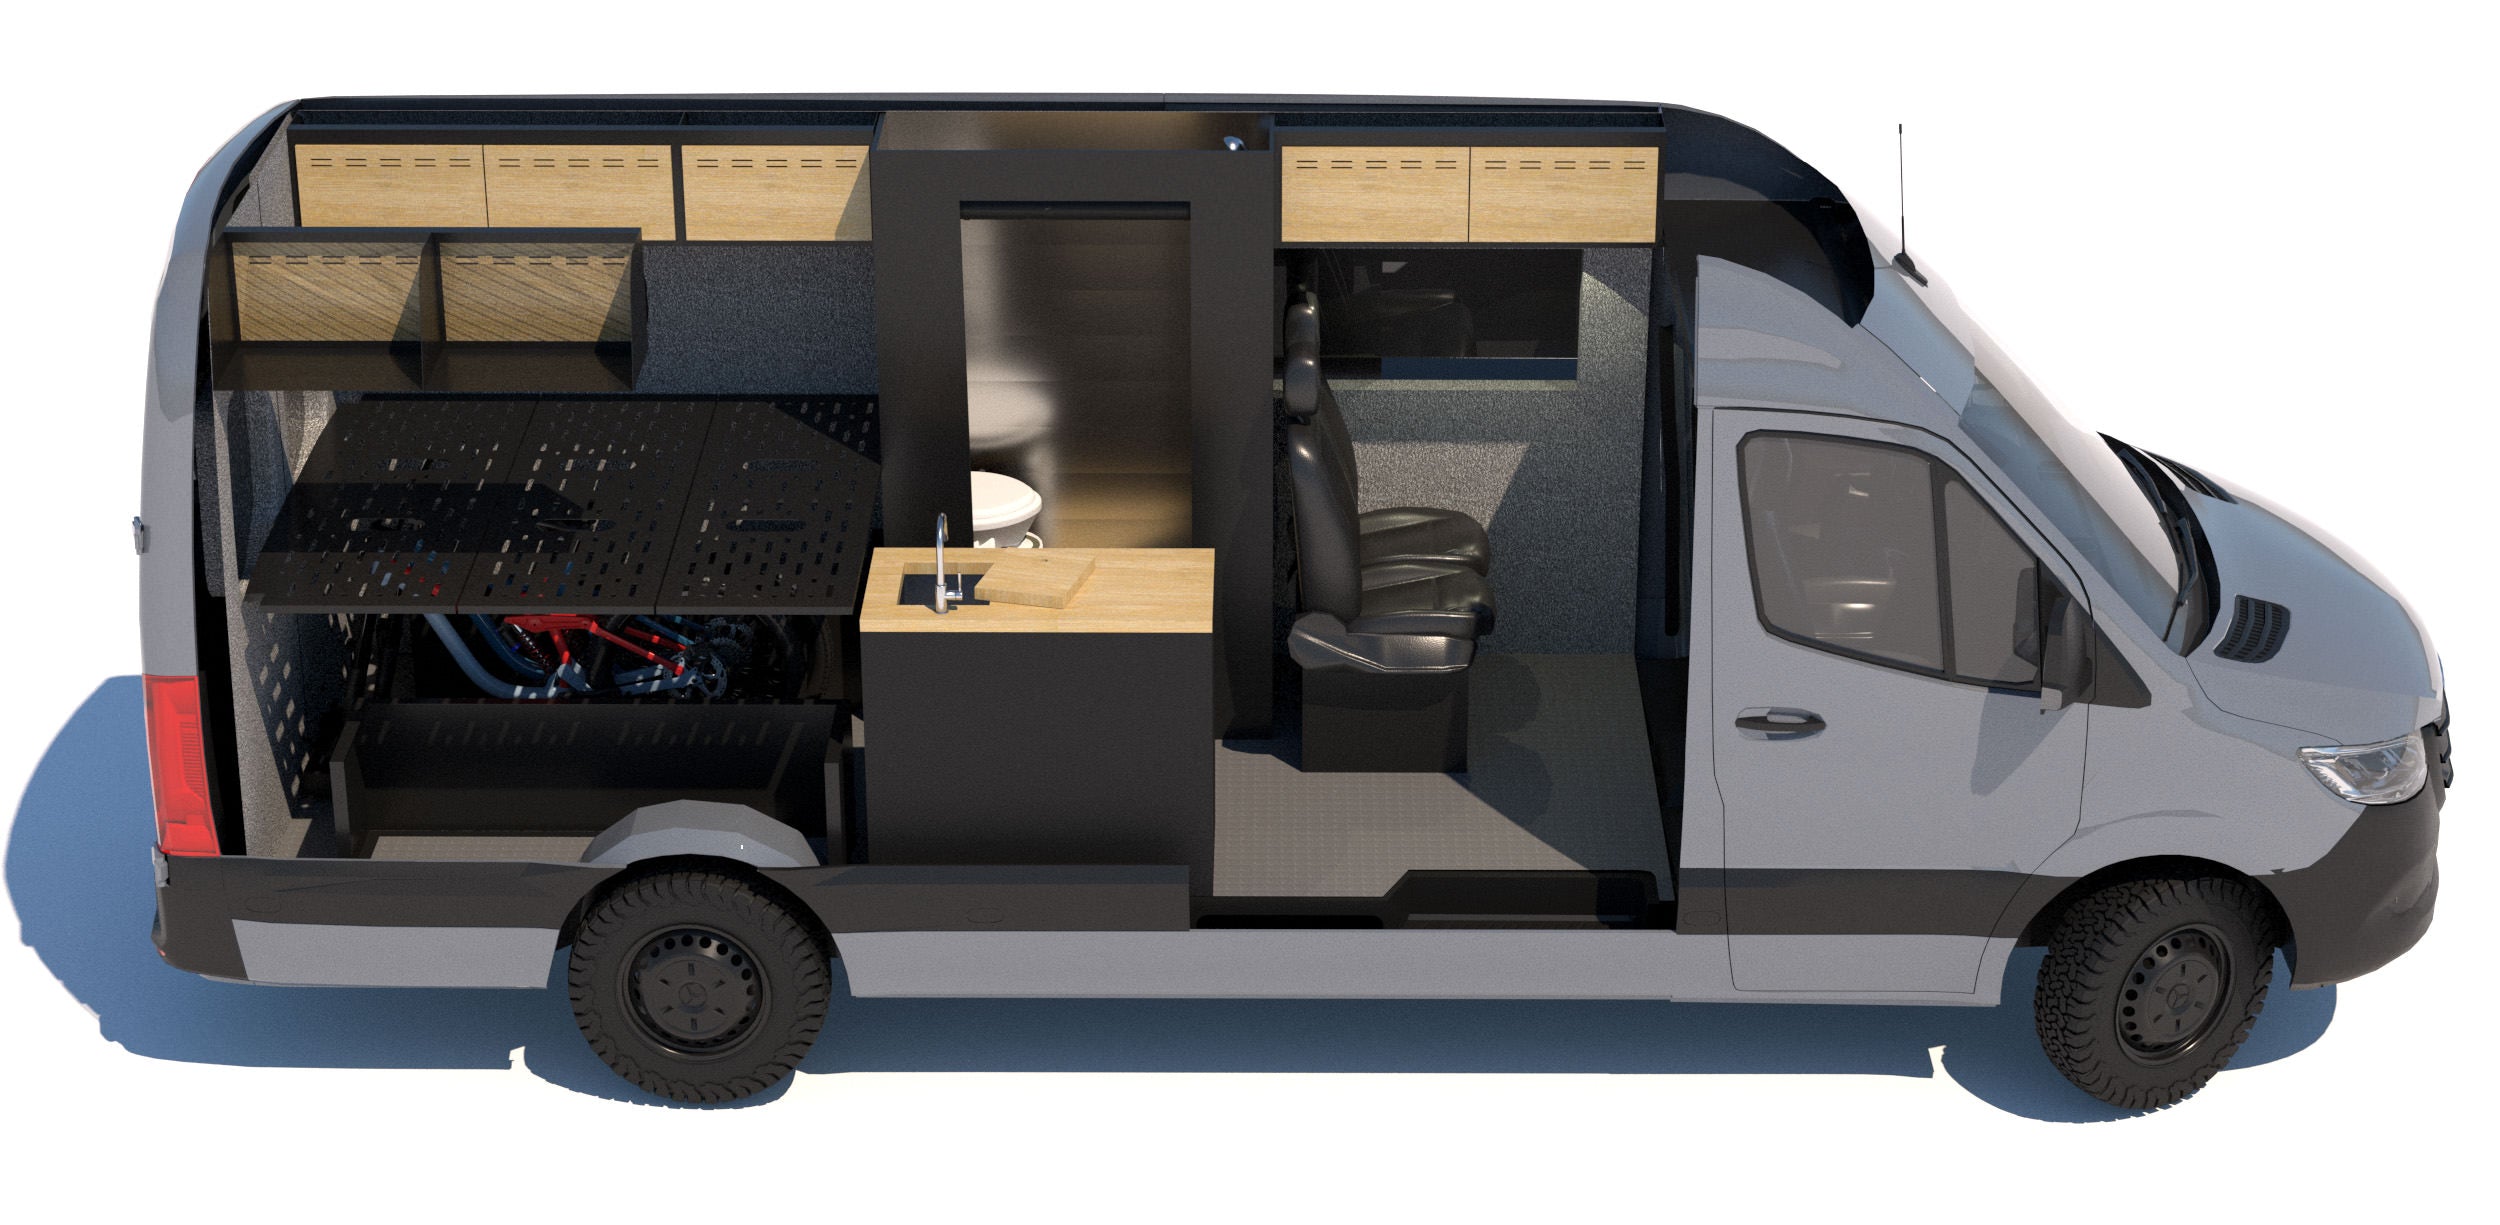 Conversion Layouts For The Sprinter 170 Van